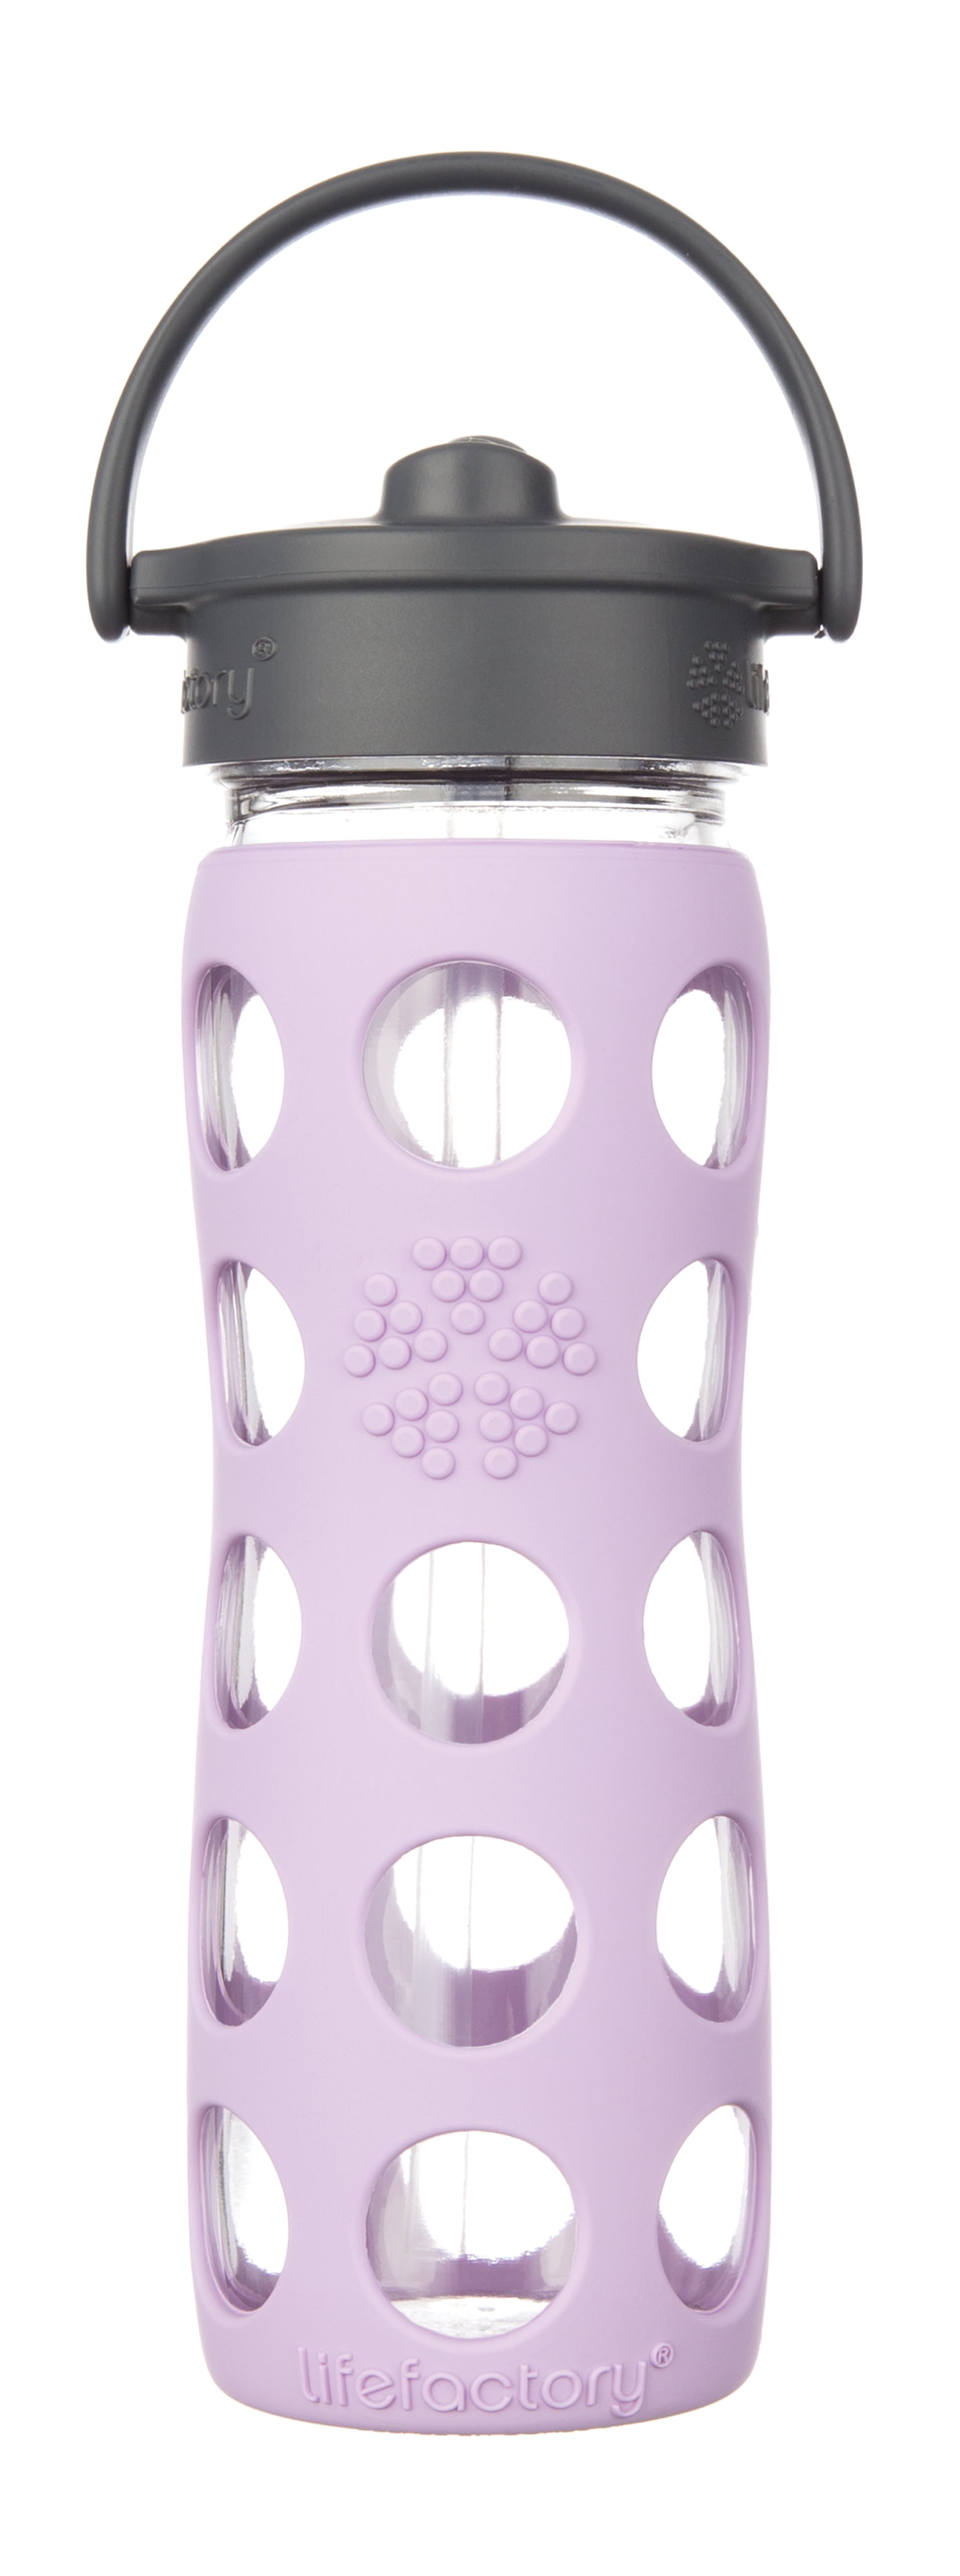 Lifefactory 16oz Glass Water Bottle with Straw Cap Lilac Purple